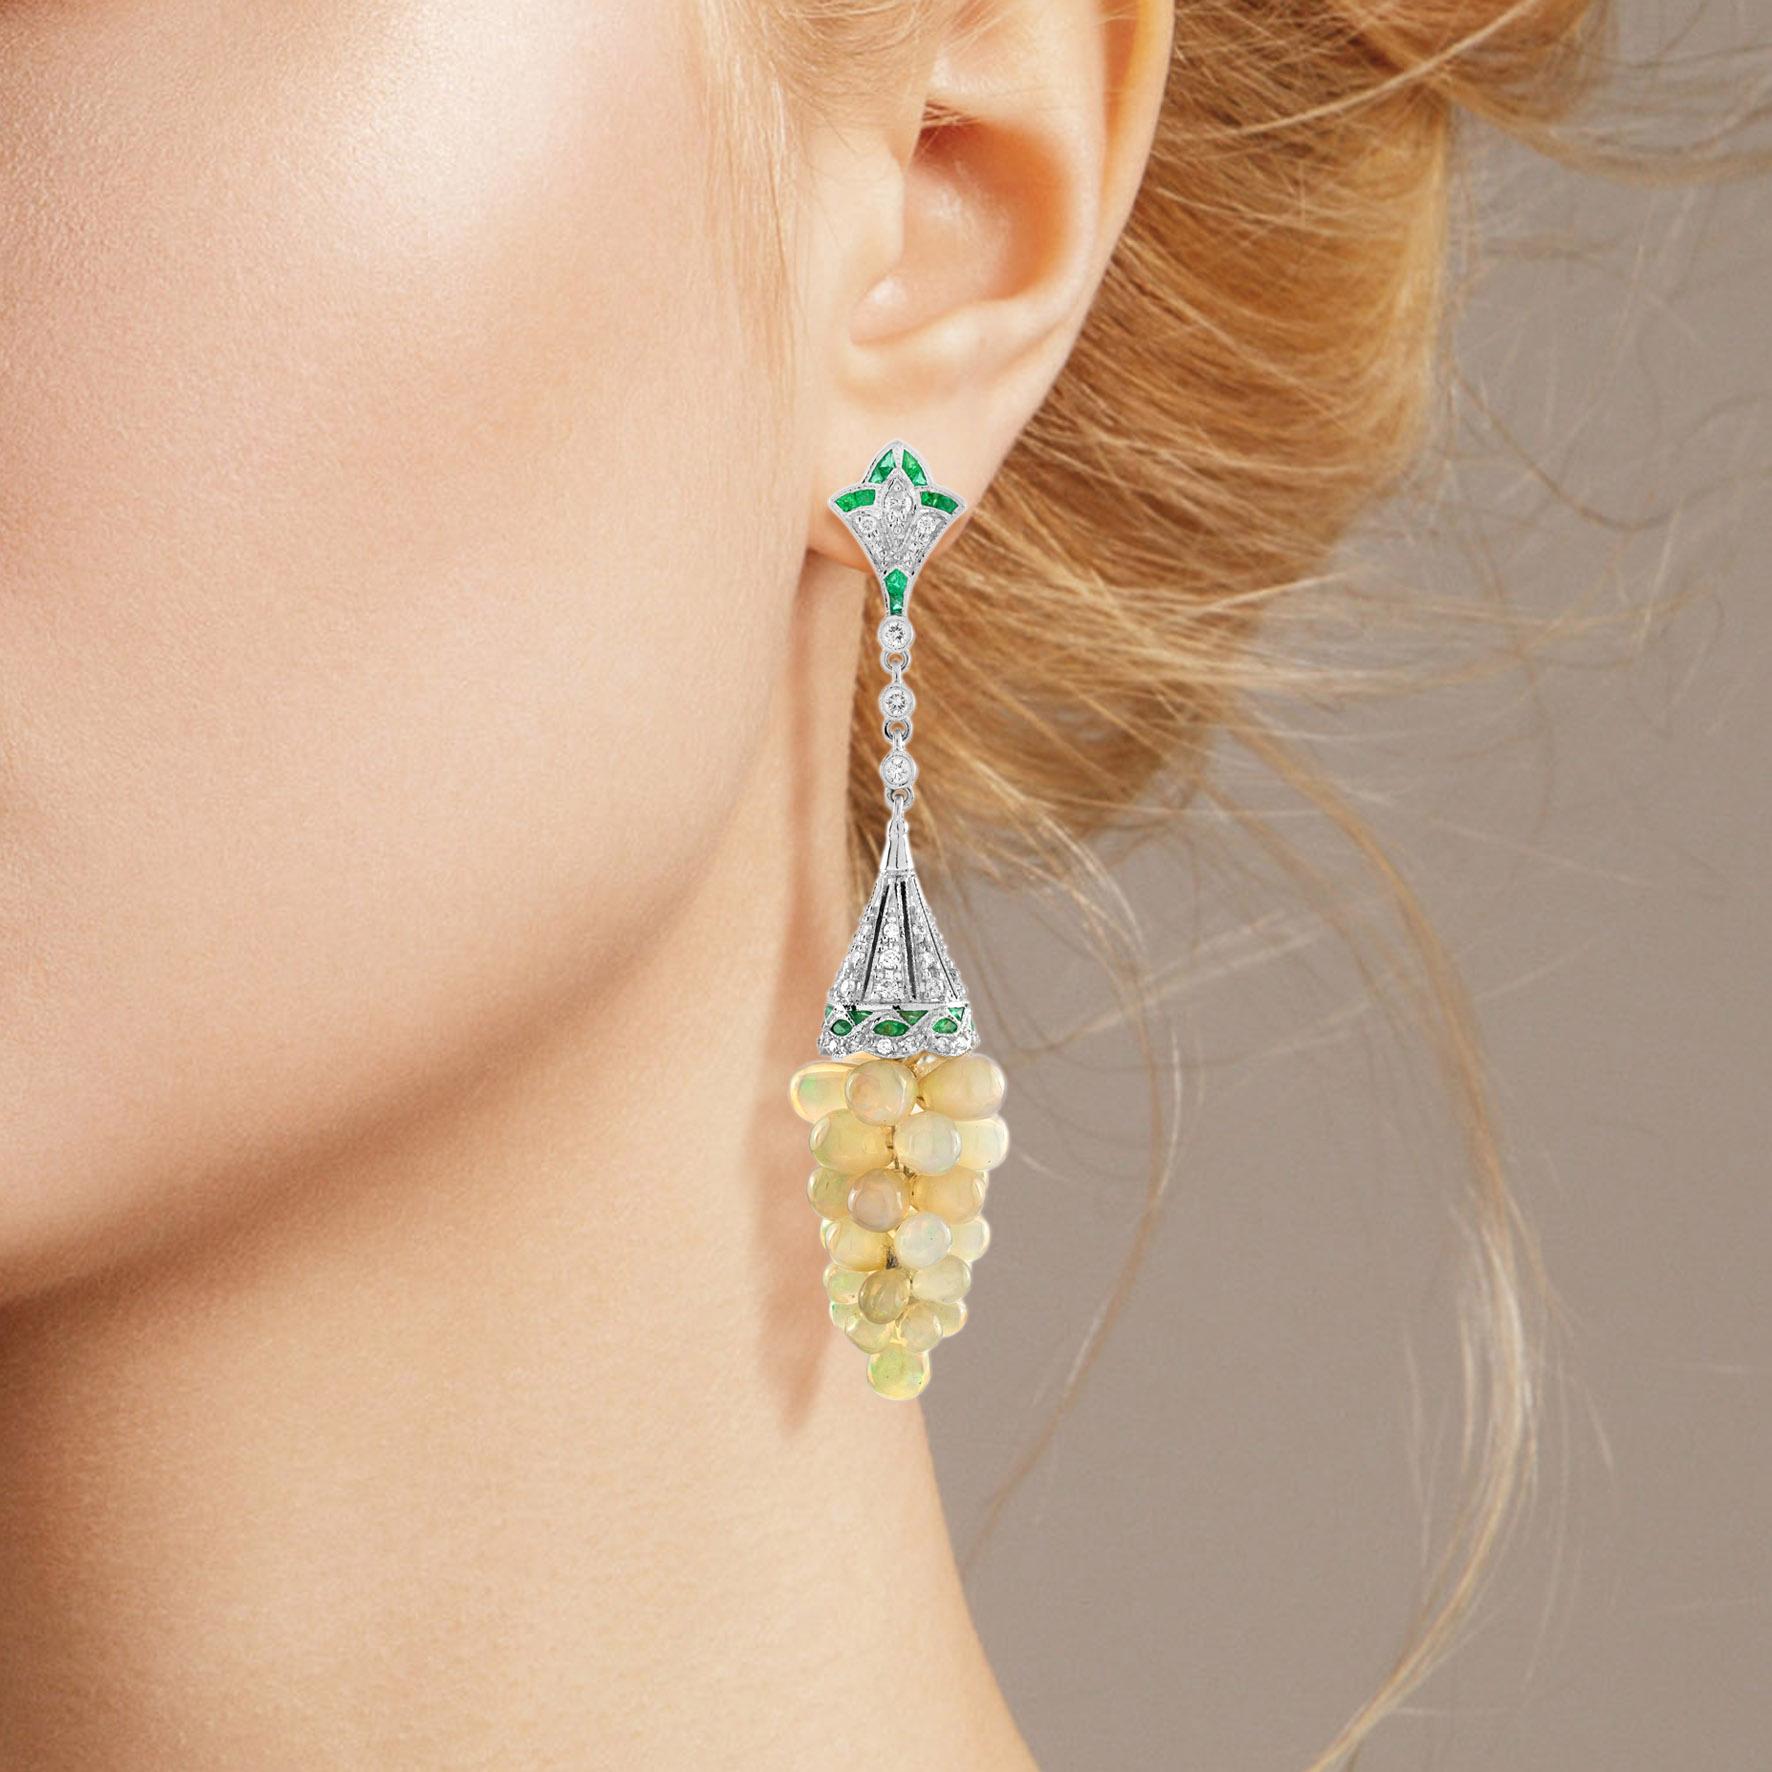 Dress up her ears in nature inspired elegance with these sophisticated opal grape dangle earrings. Crafted in 18k white gold, each earring showcases an inspiring grape drop design shimmering with total 1.60 carats emeralds and 0.93 carat diamond.